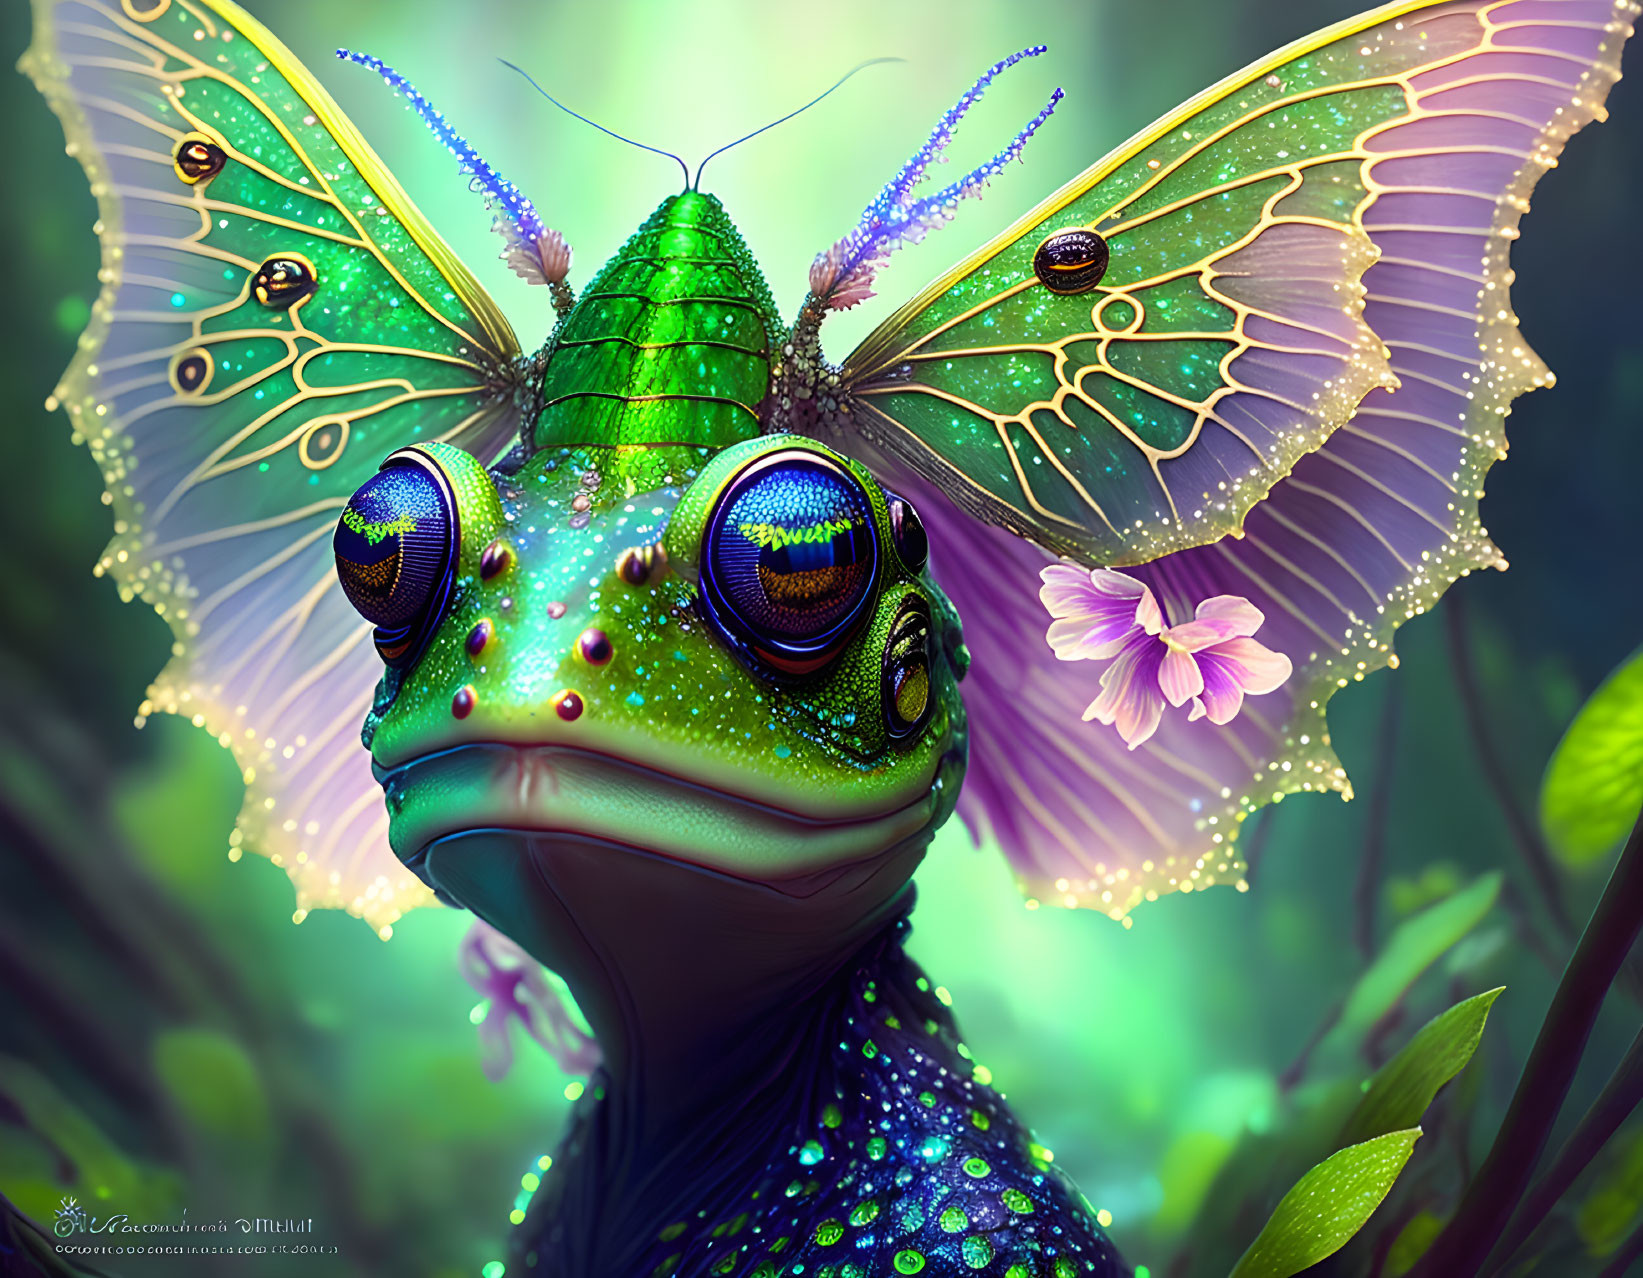 Colorful Fantasy Creature with Frog Head and Butterfly Wings in Lush Foliage